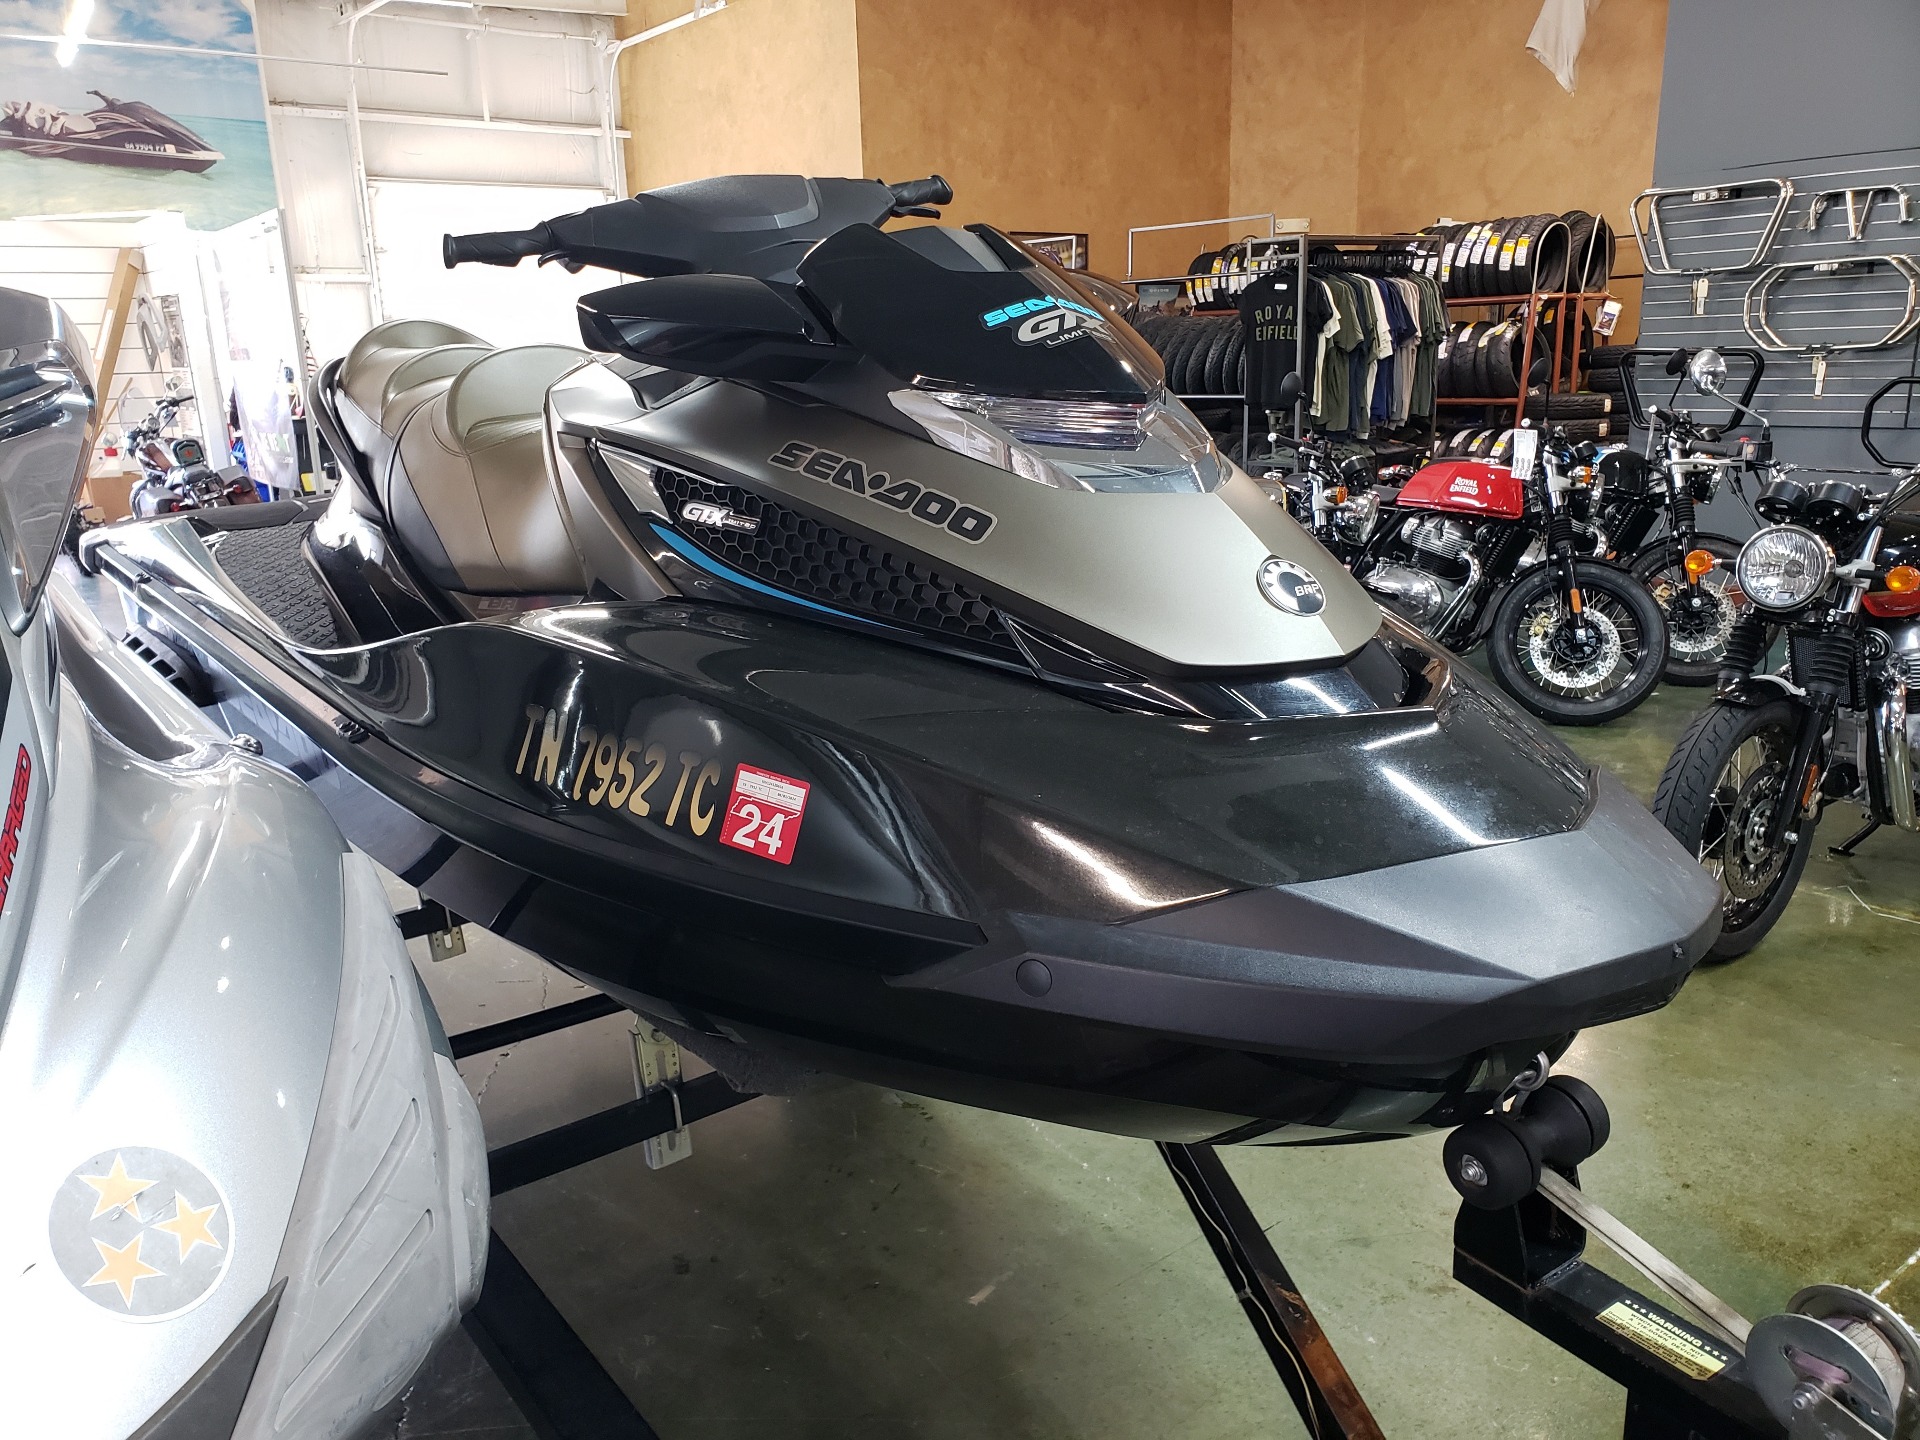 2016 Sea-Doo GTX Limited 215 in Louisville, Tennessee - Photo 1